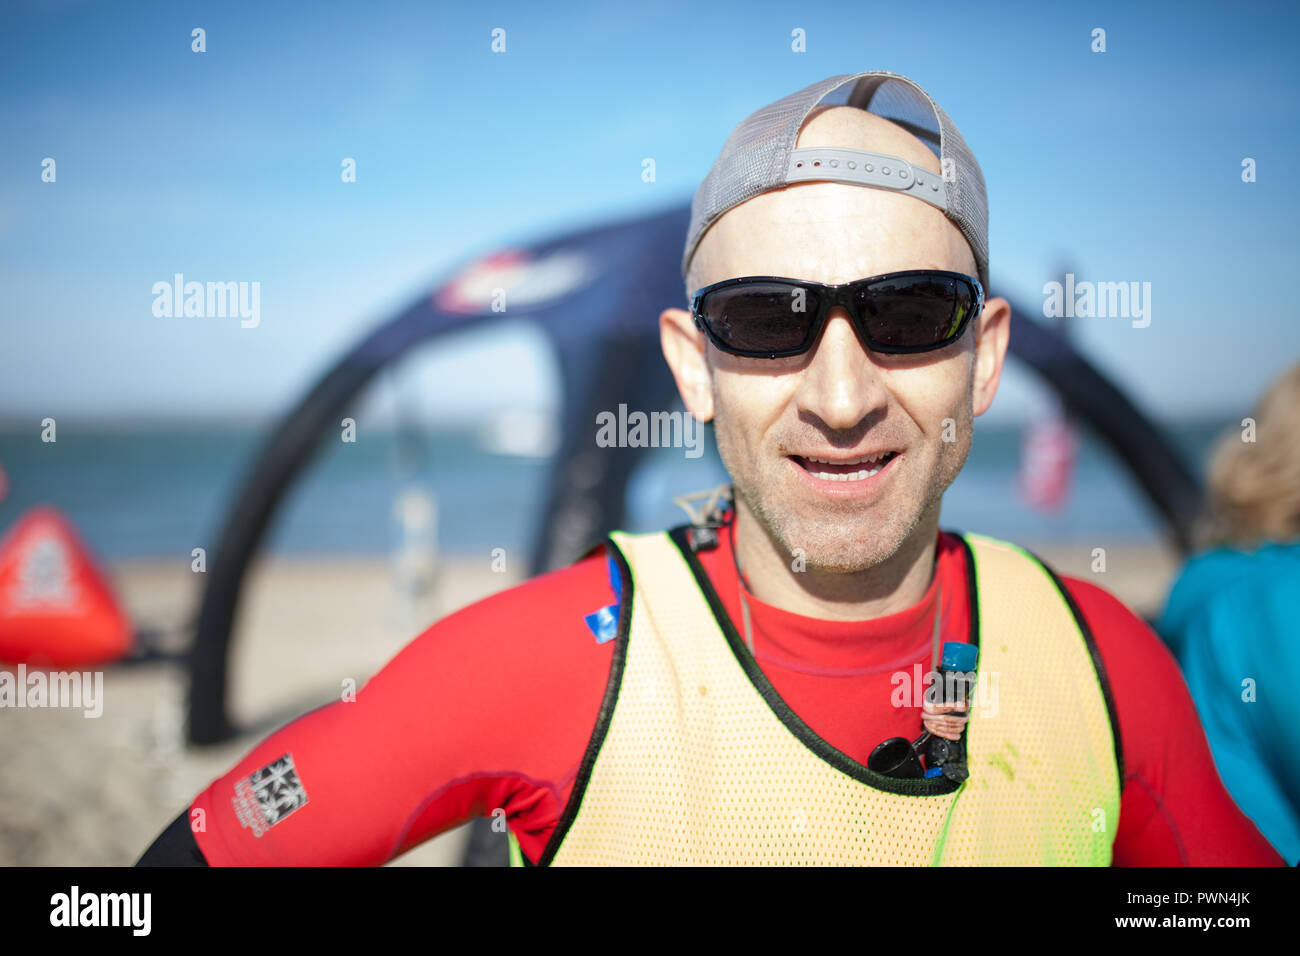 Portrait of a paddle boarder after a race Stock Photo